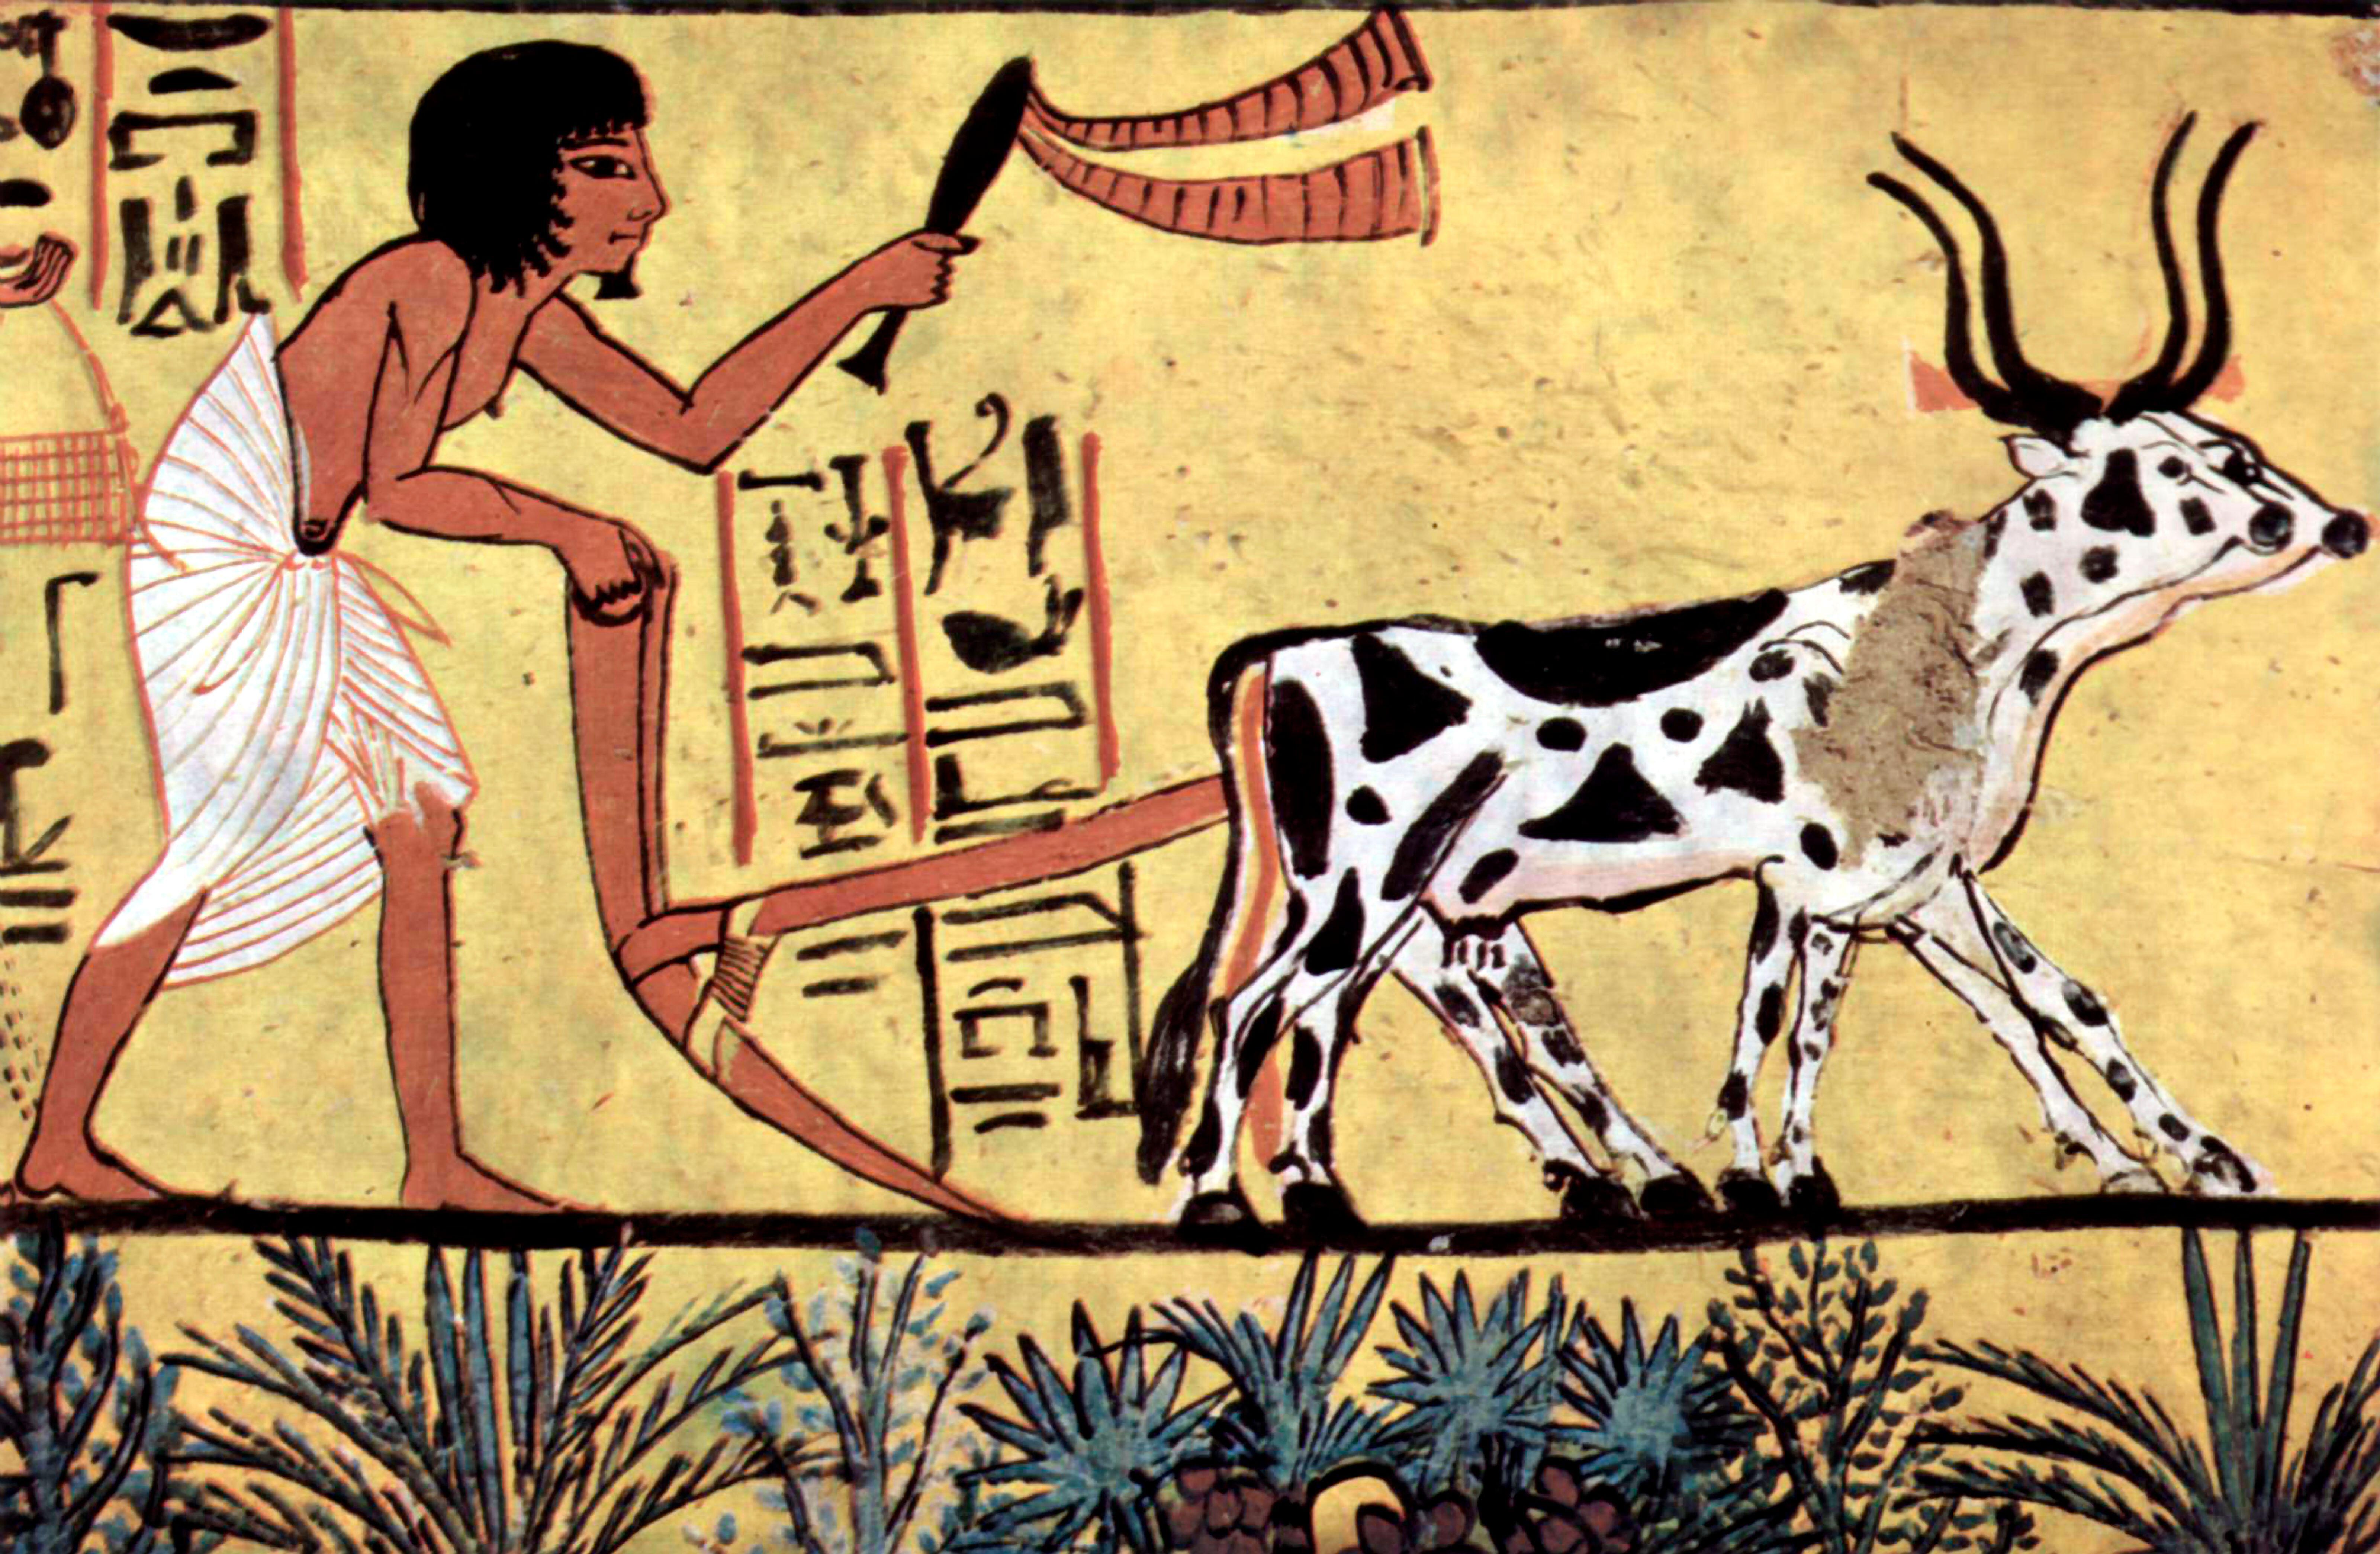 Egyptian figure painting with ox and plow on yellow wall.